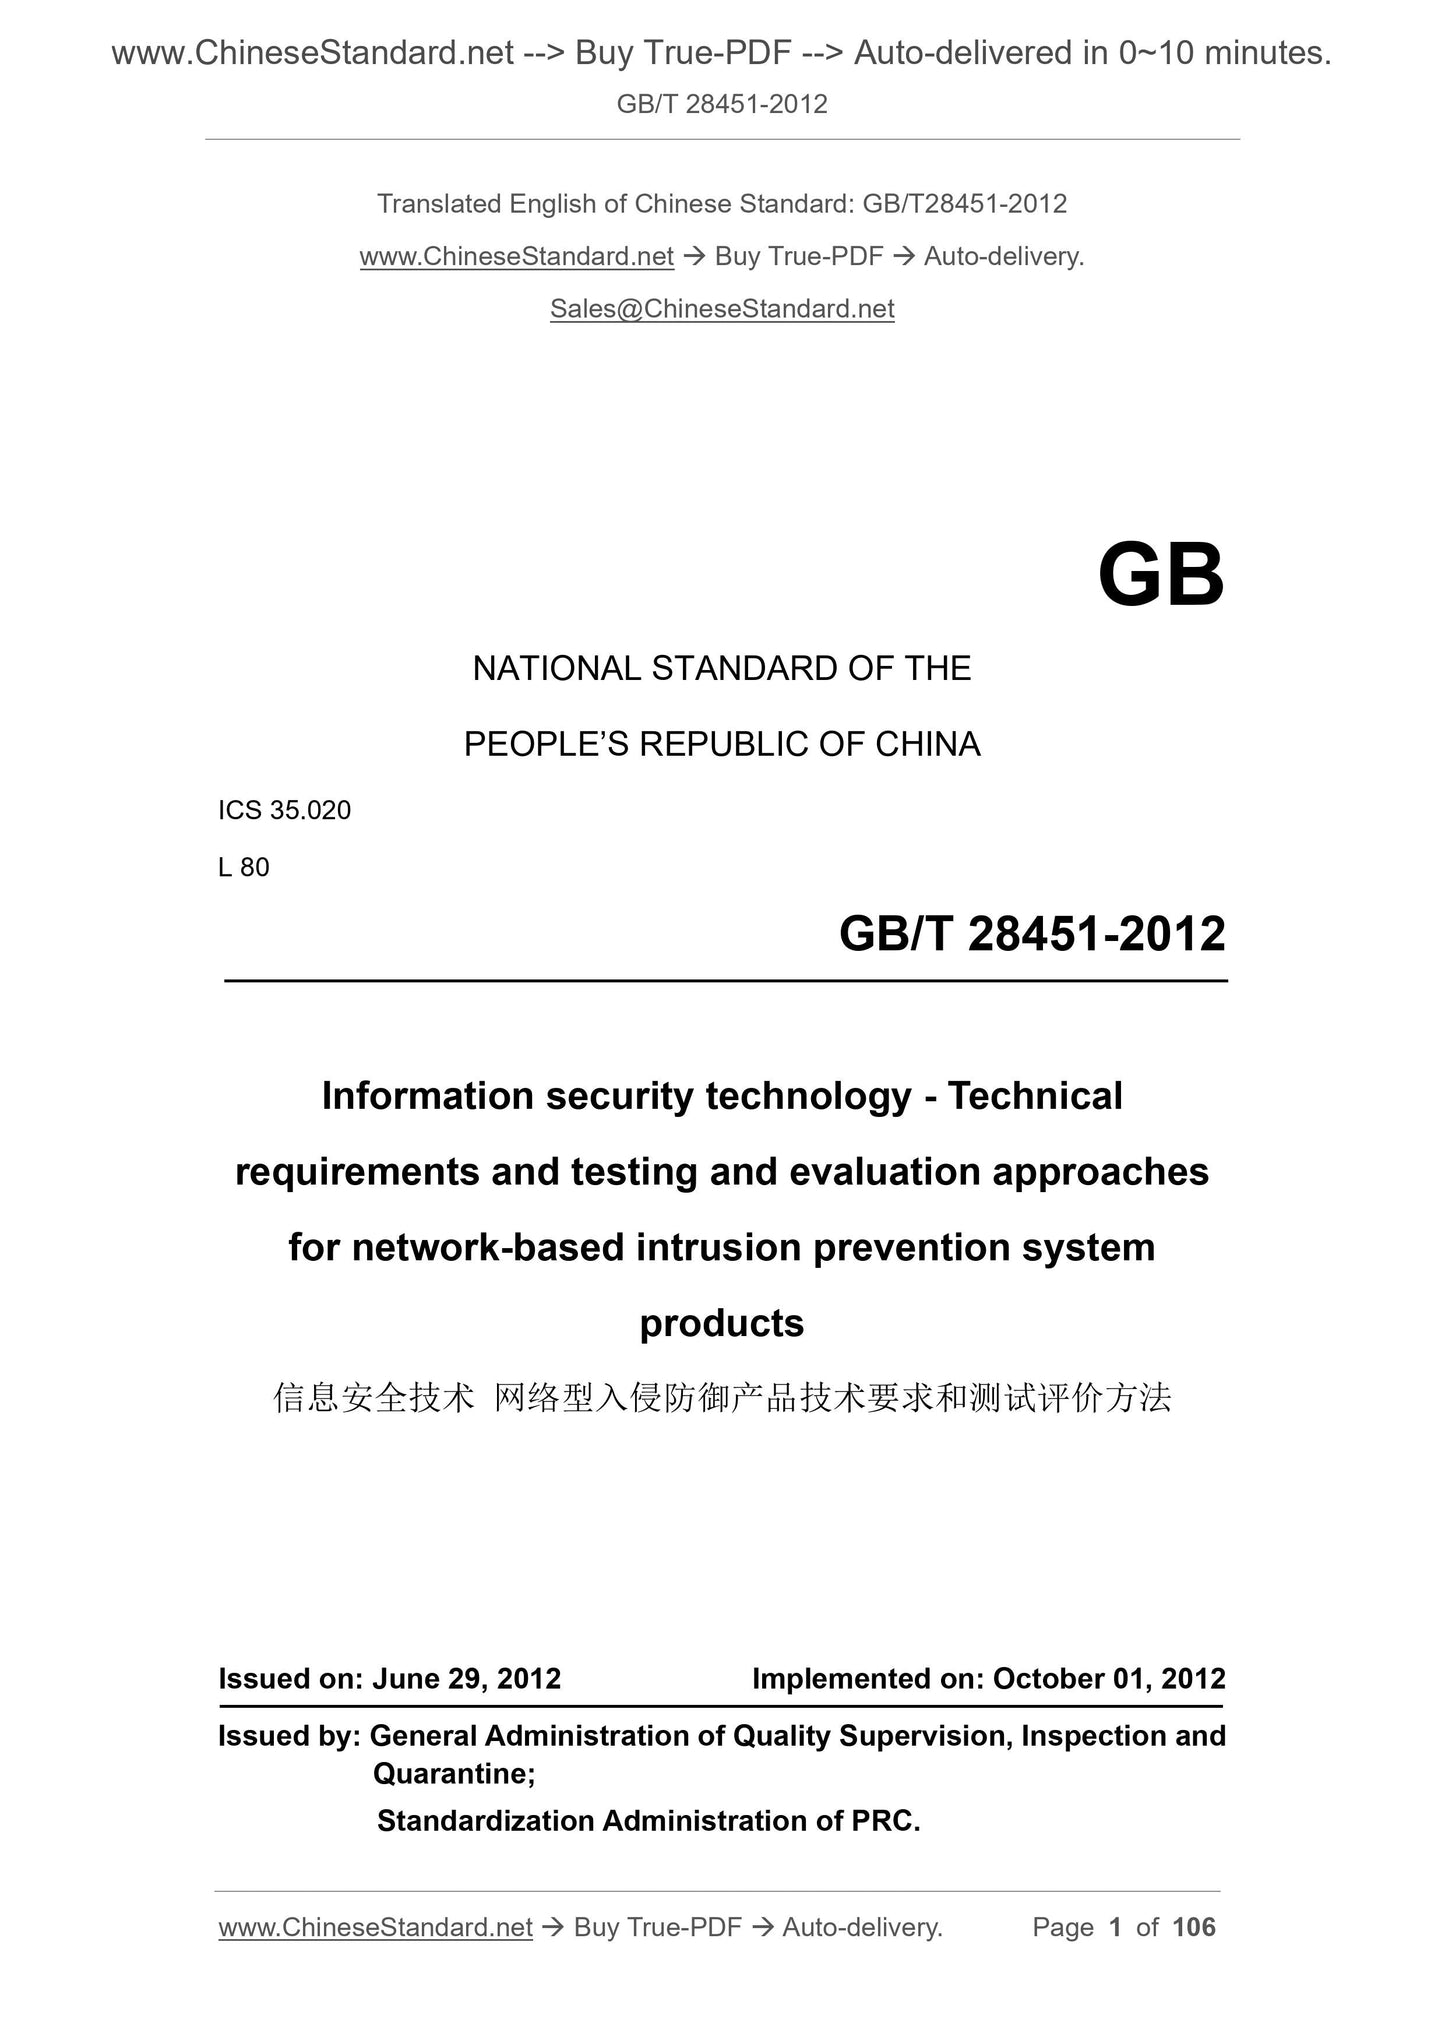 GB/T 28451-2012 Page 1